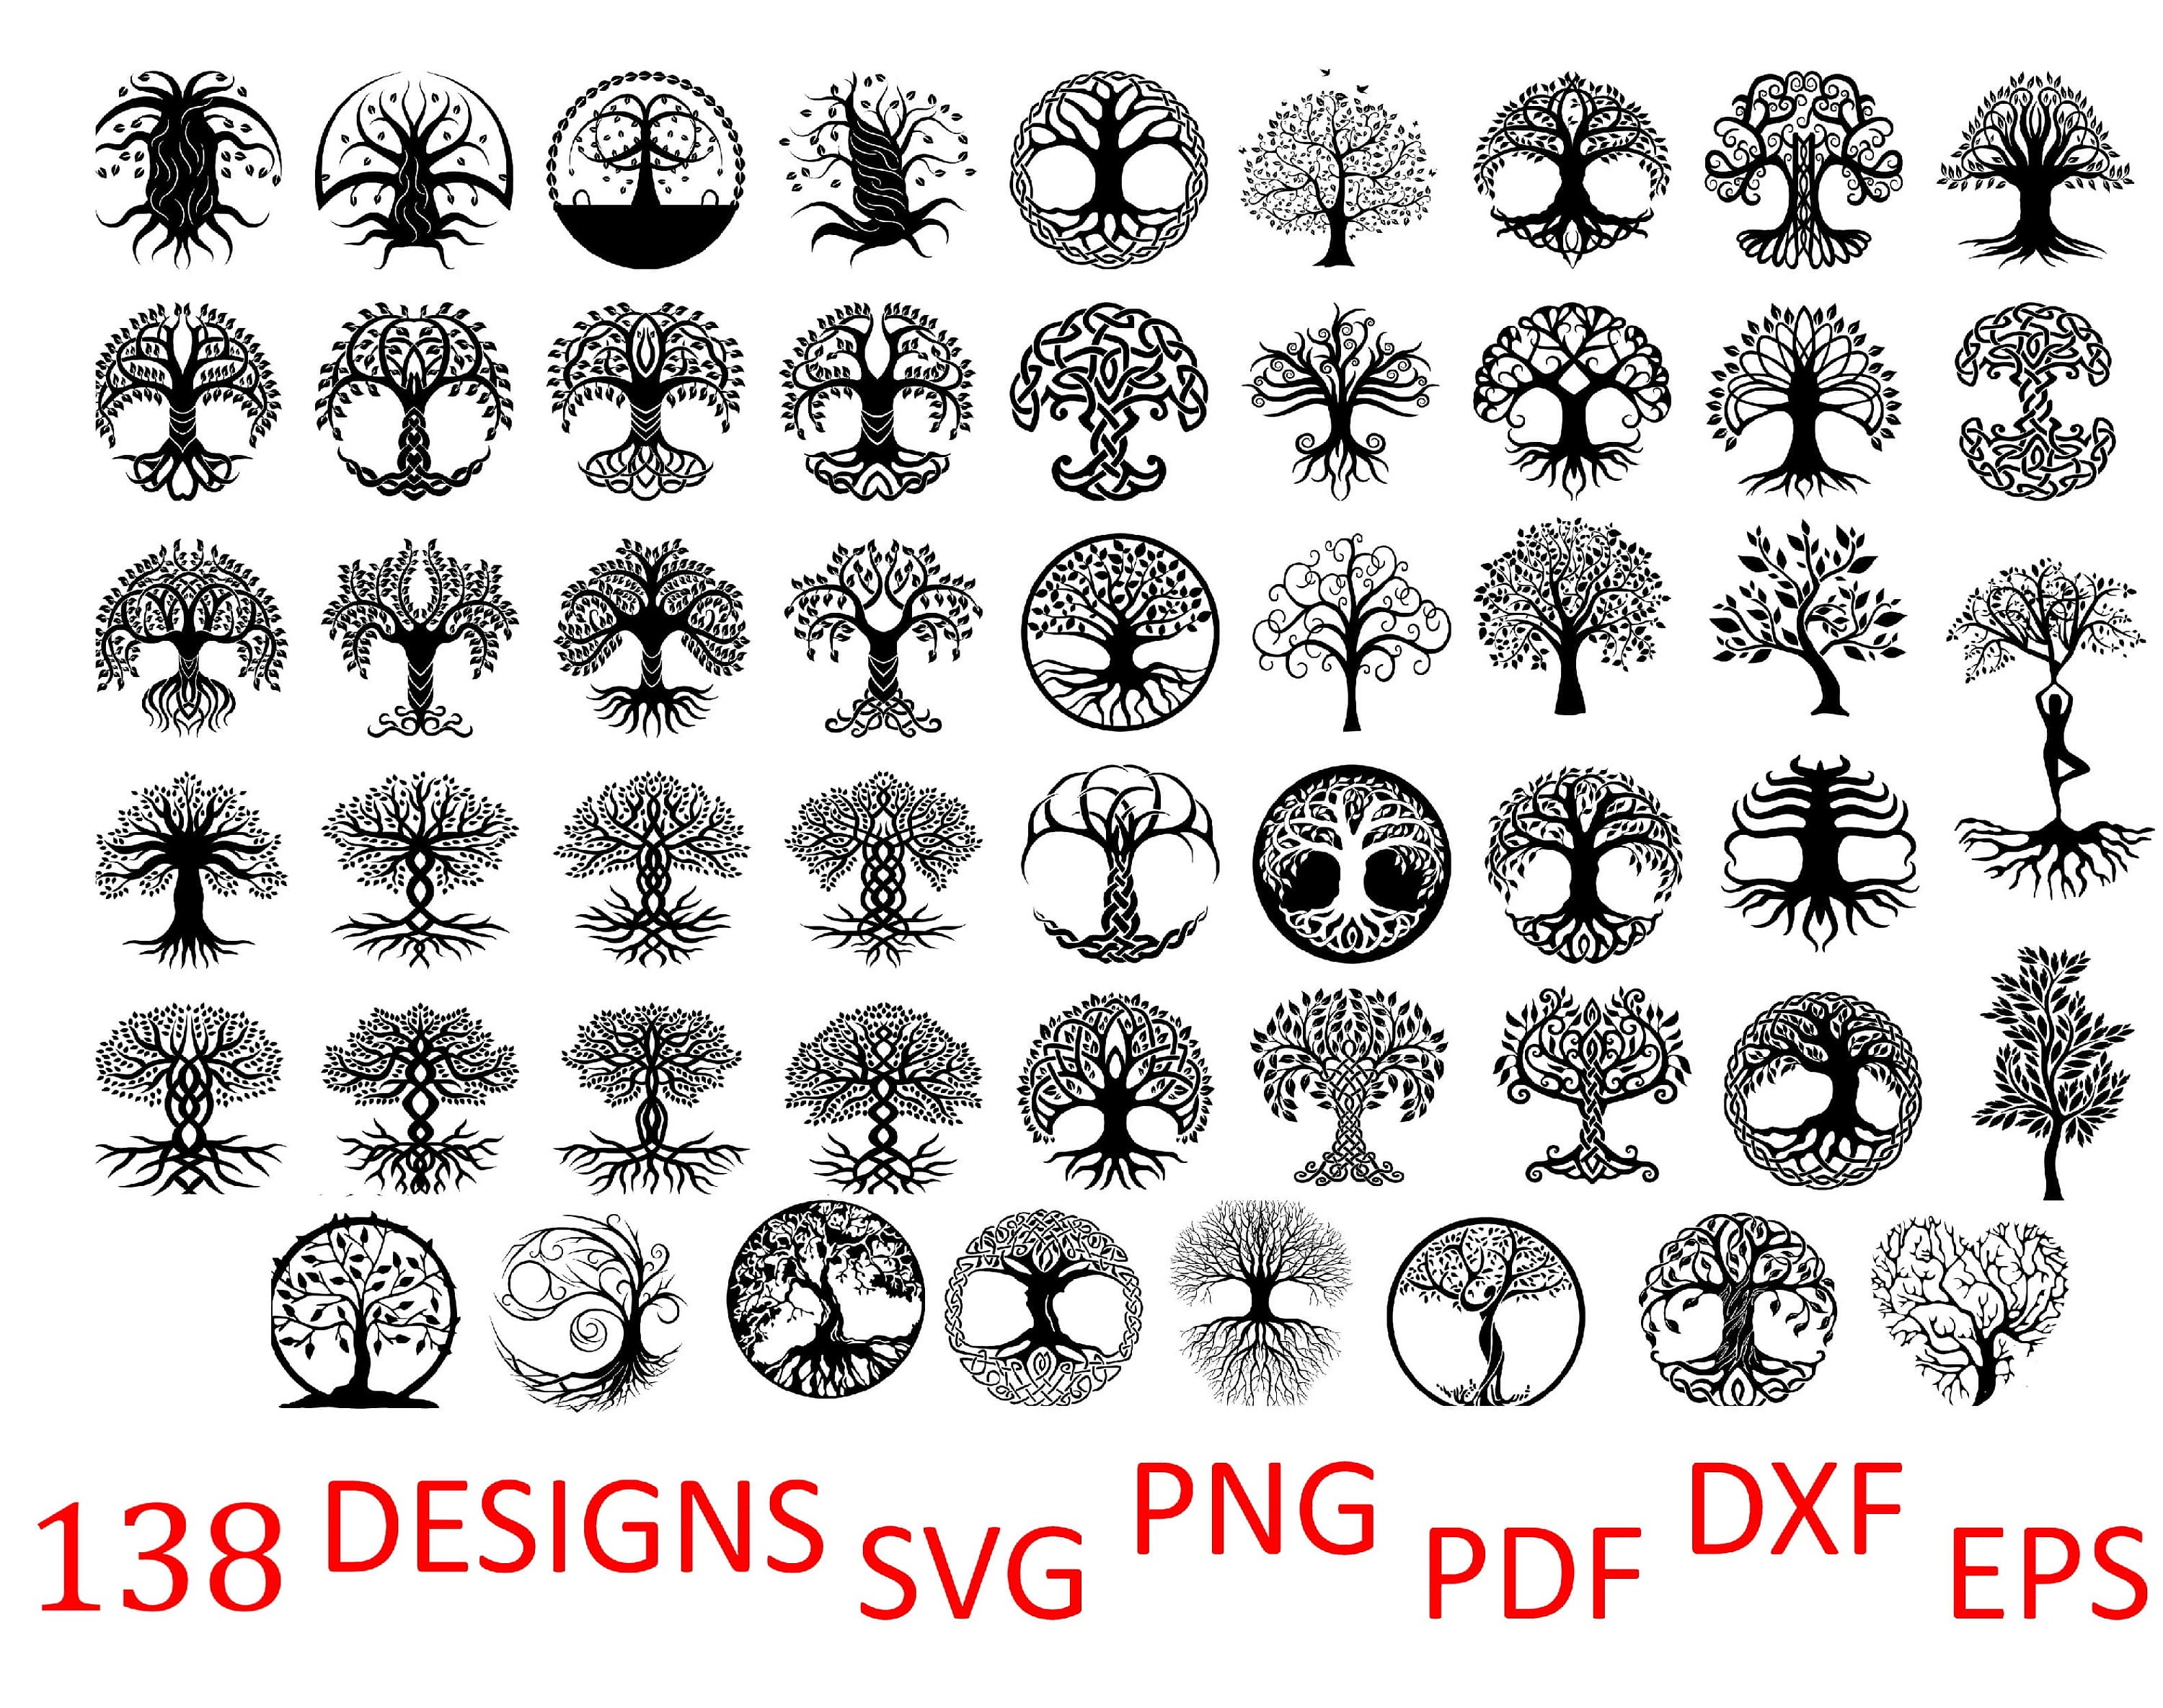 PDF Pattern, Vector DXF File and Instructional Video, Tree of Life Bag